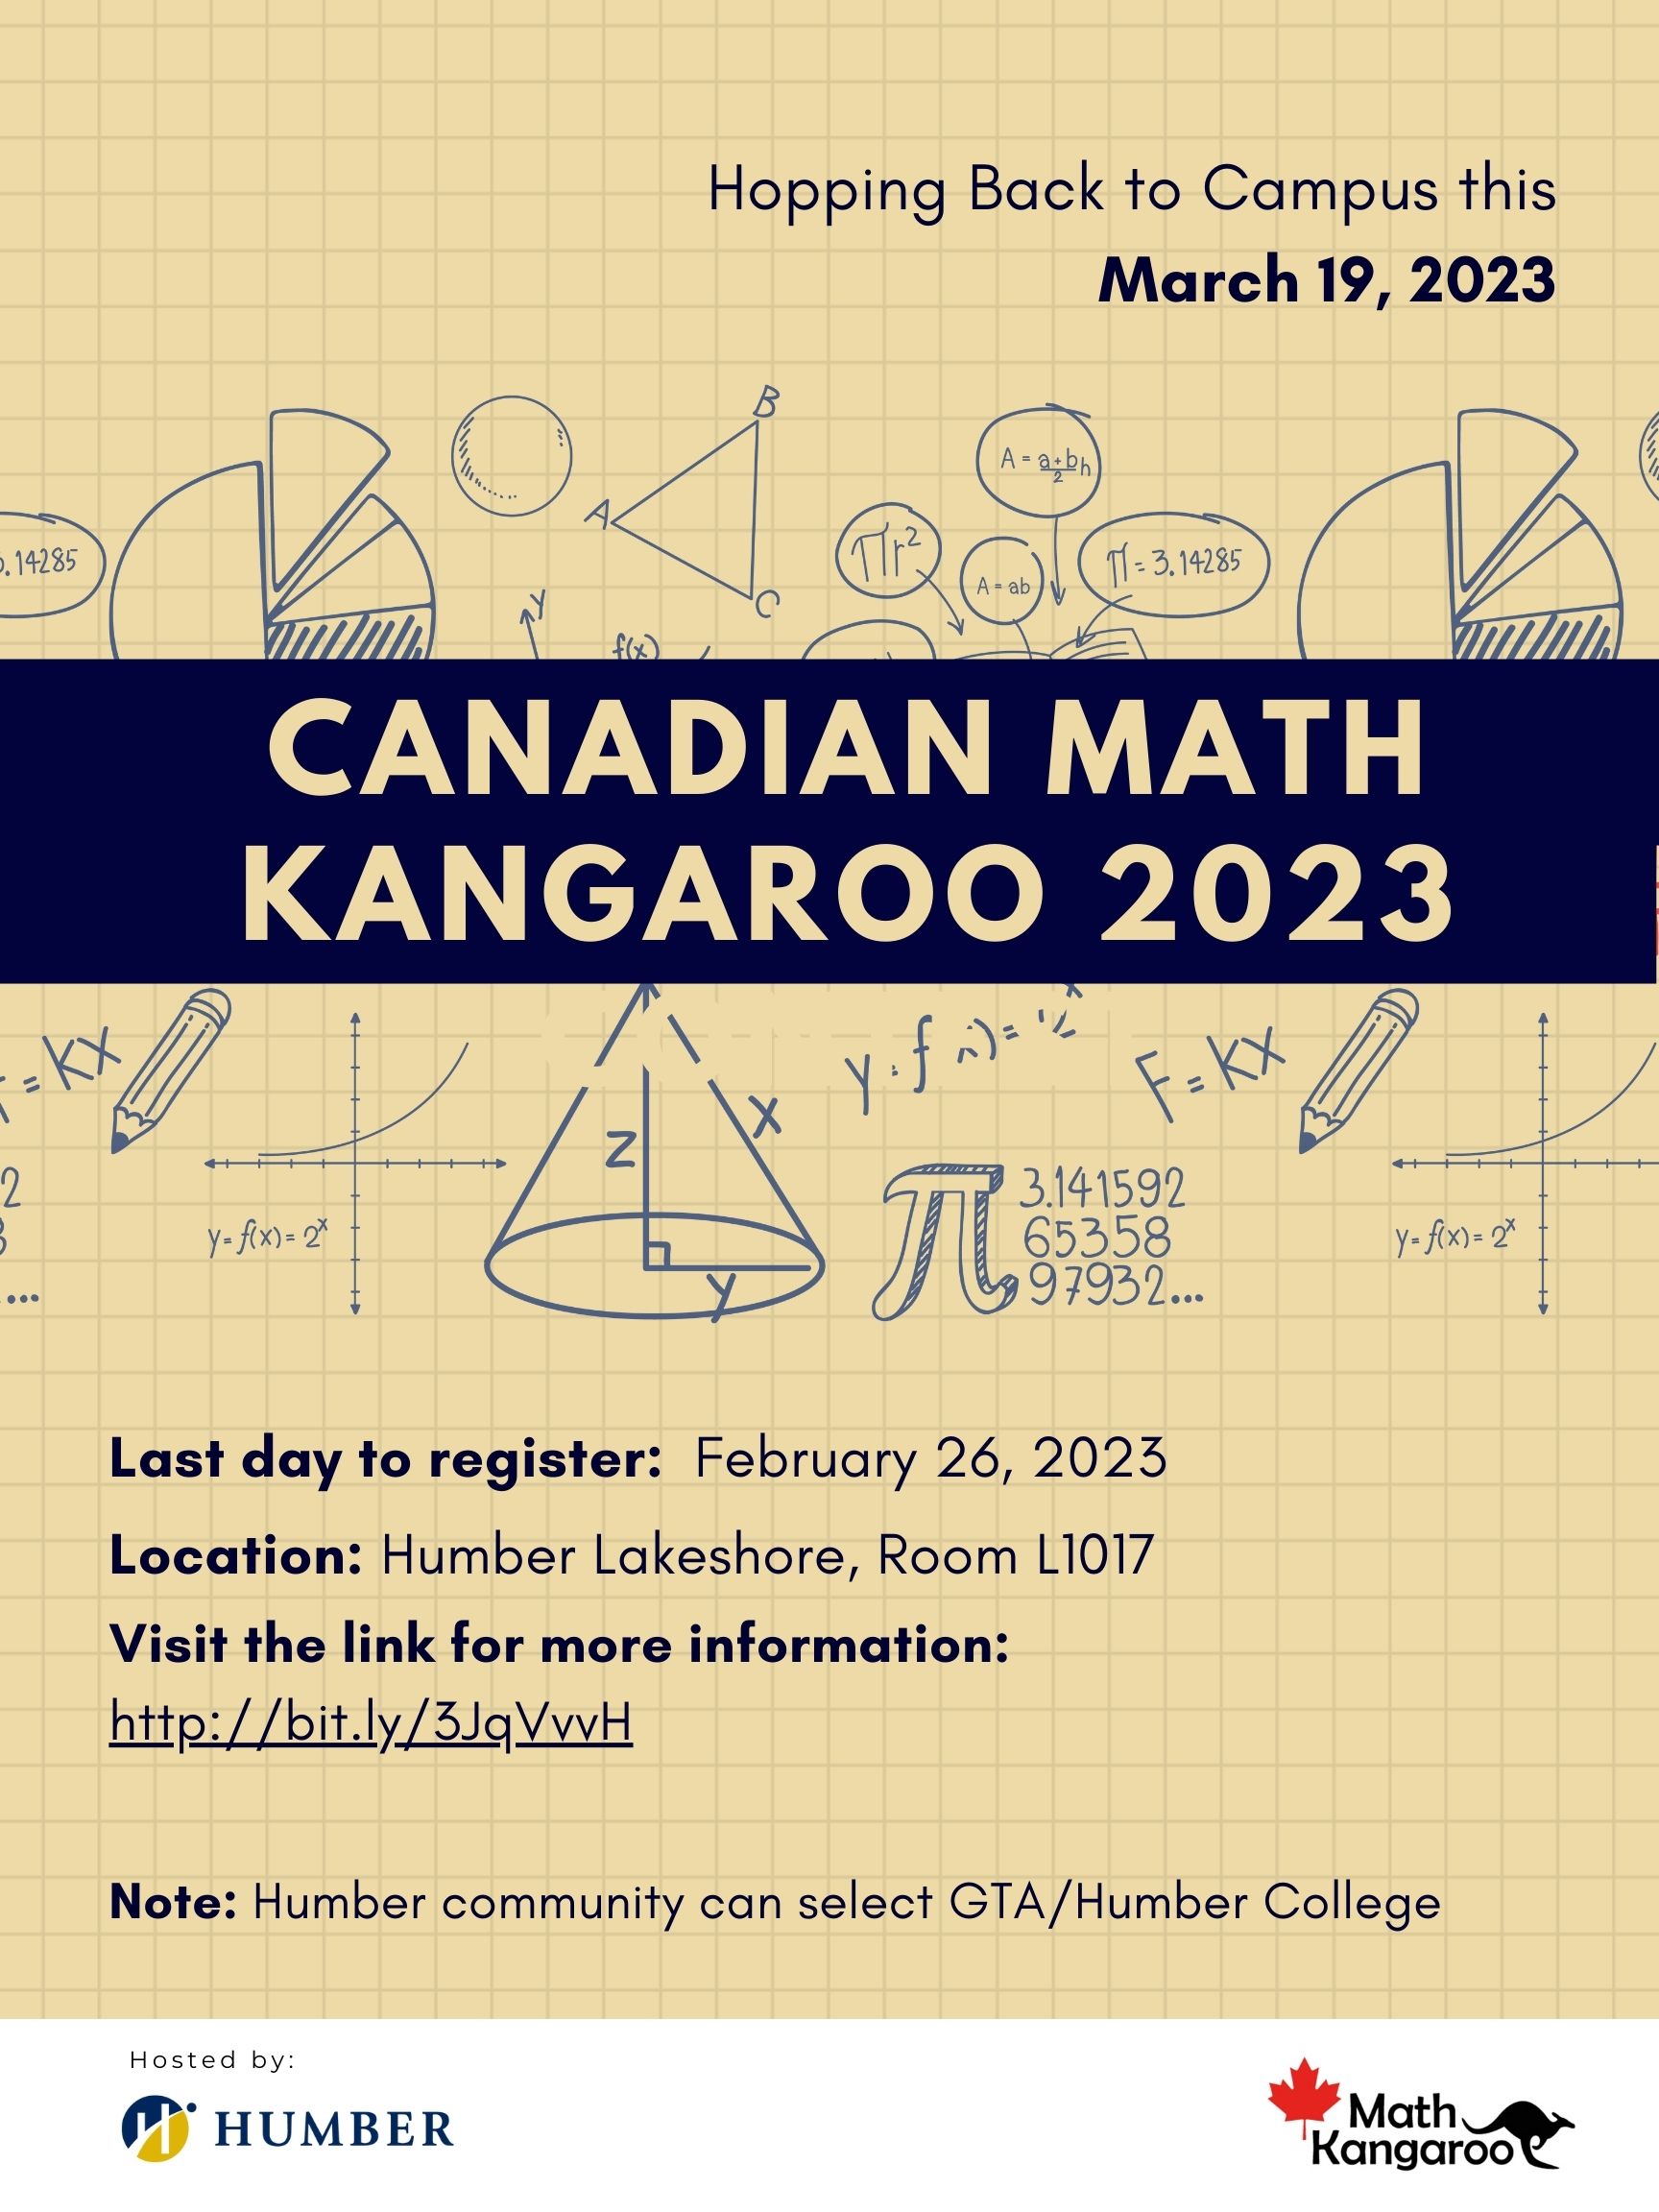 2023 Canadian Math Kangaroo Contest Hopping Back to Humber College